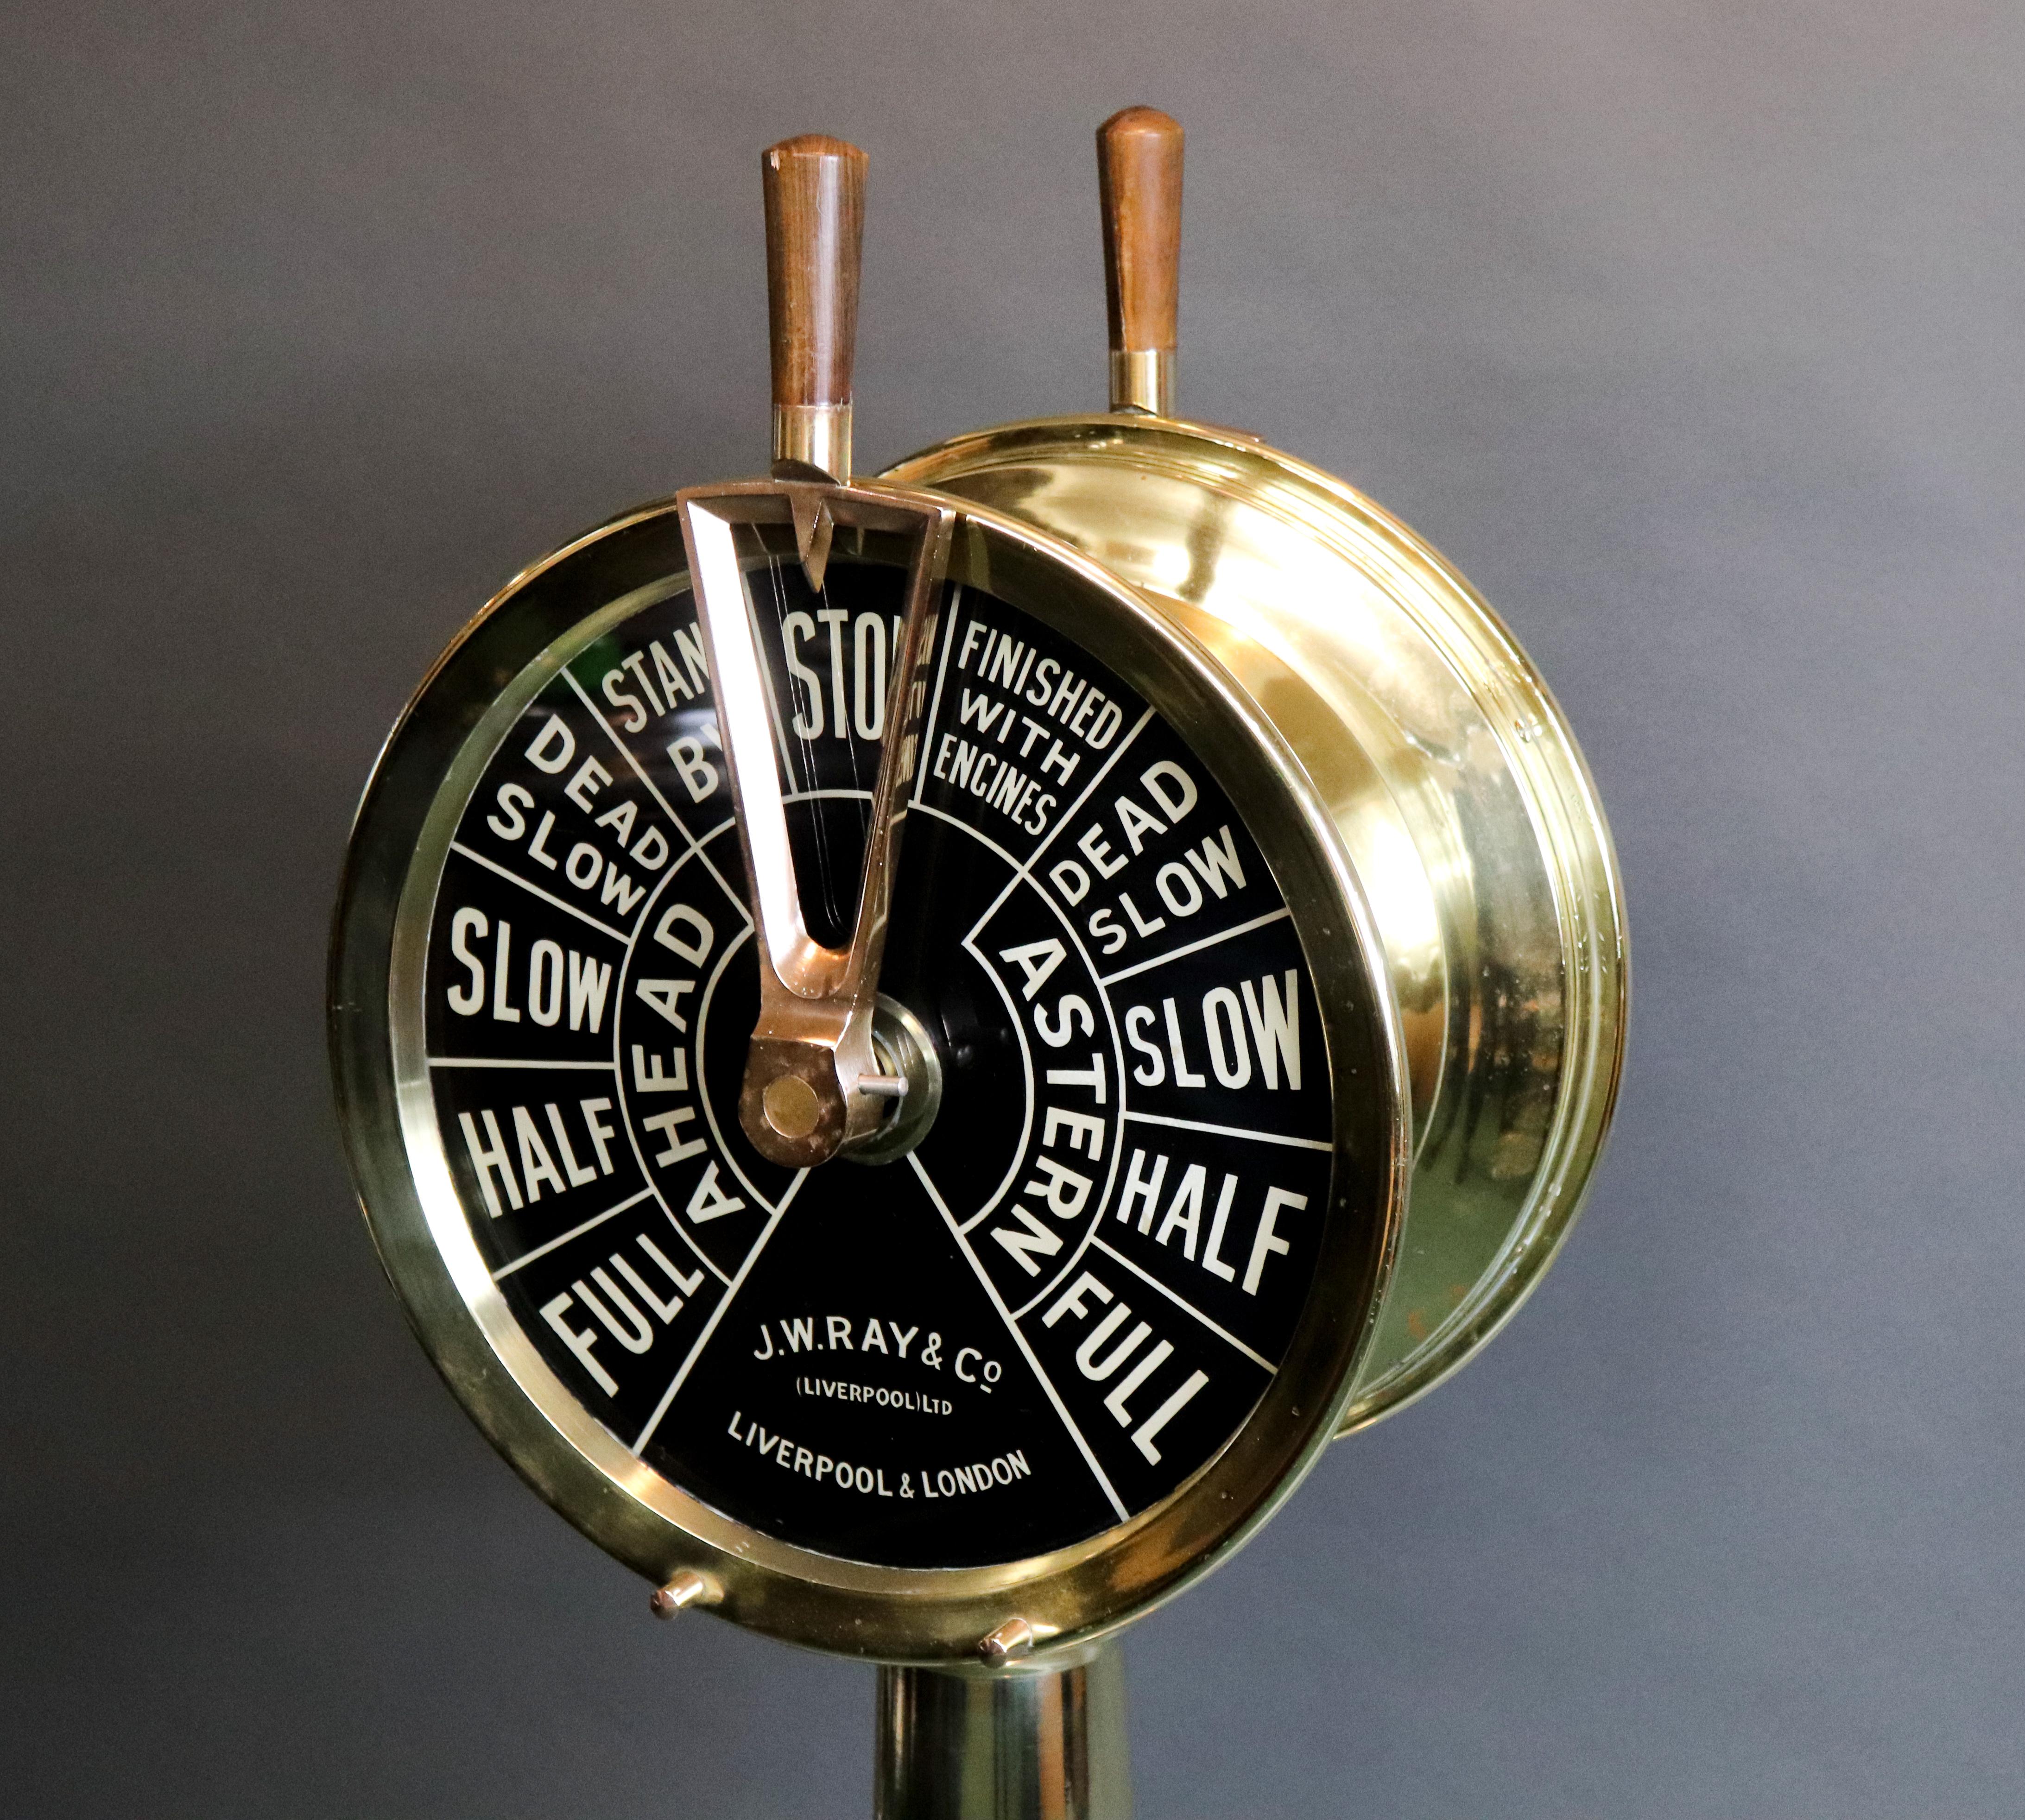 Double faced engine room telegraph by JW Ray & Co. of Liverpool London. Highly polished finish. Faceplates show complete ahead and astern commands. 50